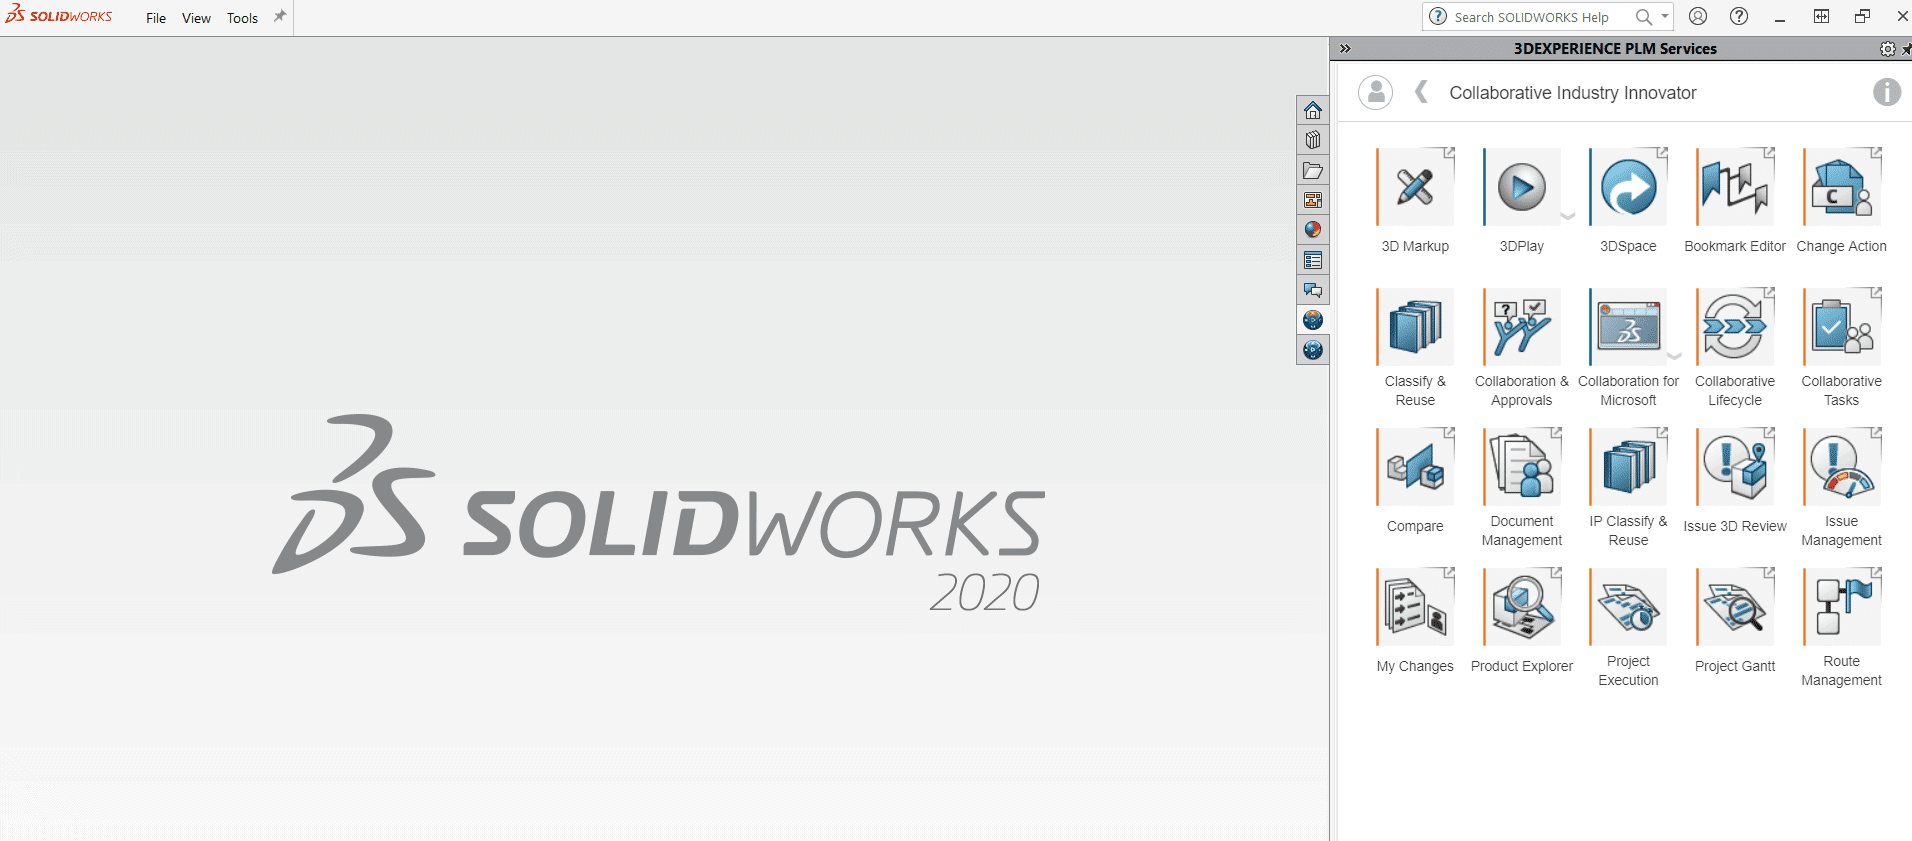 Collaborative Industry Innovator in SOLIDWORKS